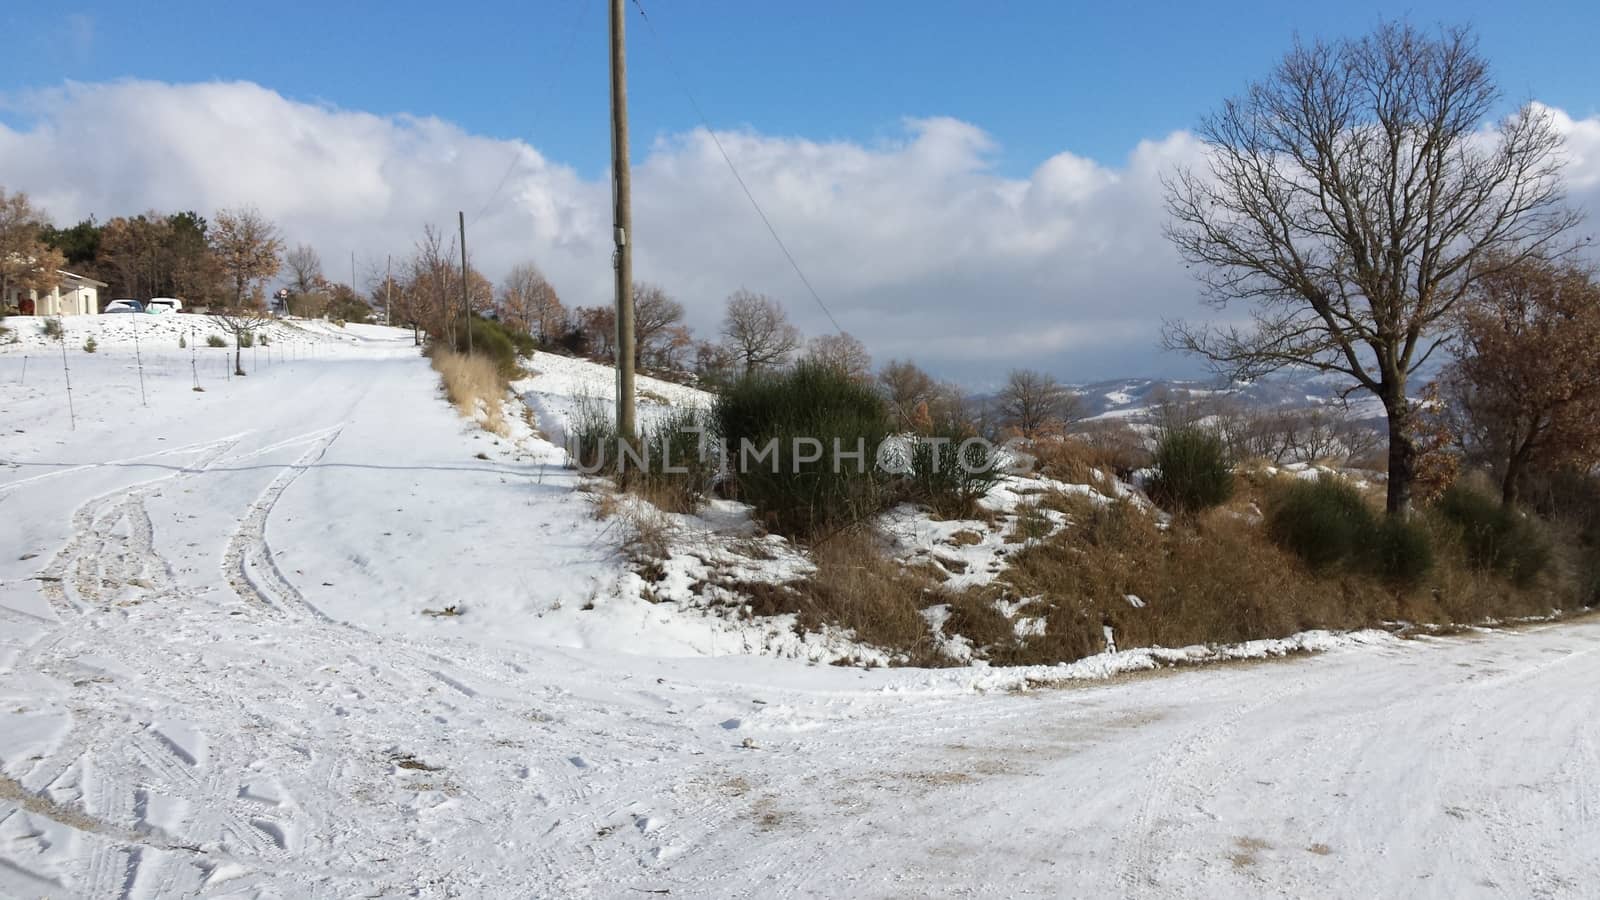 The countryside of Umbria near to Gubbio under the snow during the Winter - Beautiful landscape covered by snow in a sunny day by matteobartolini